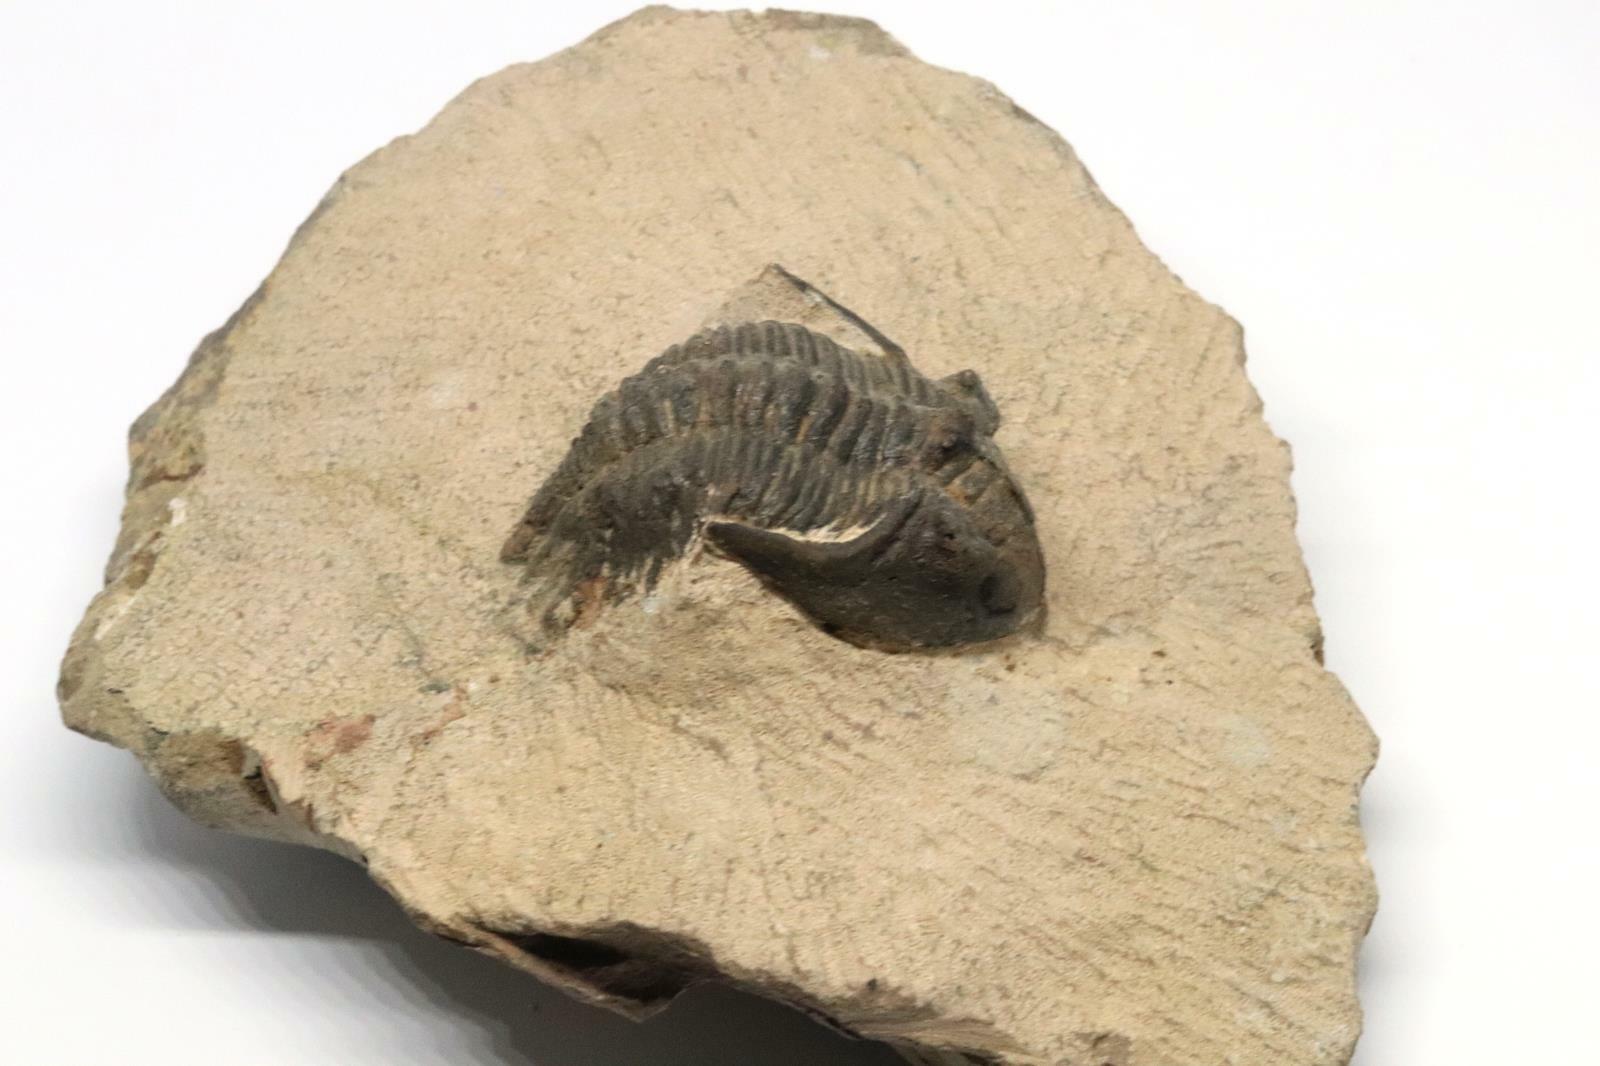 TRILOBITE Metacanthina Fossil Morocco 390 Million Years old #15158 18o